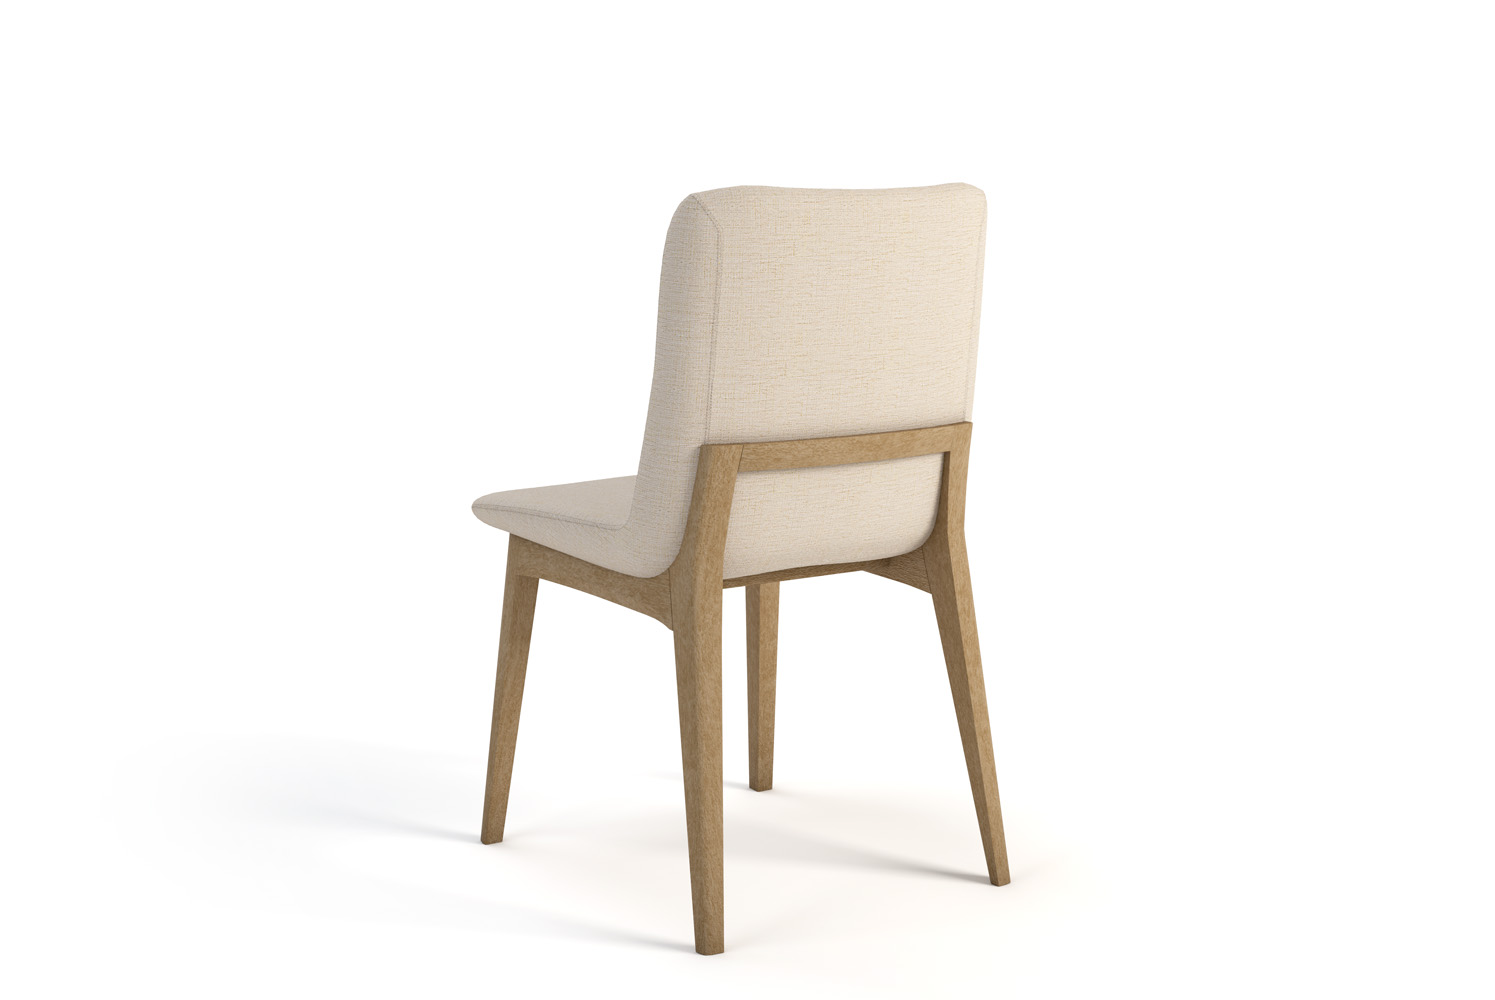 Addy Wood Leg Chair Back View